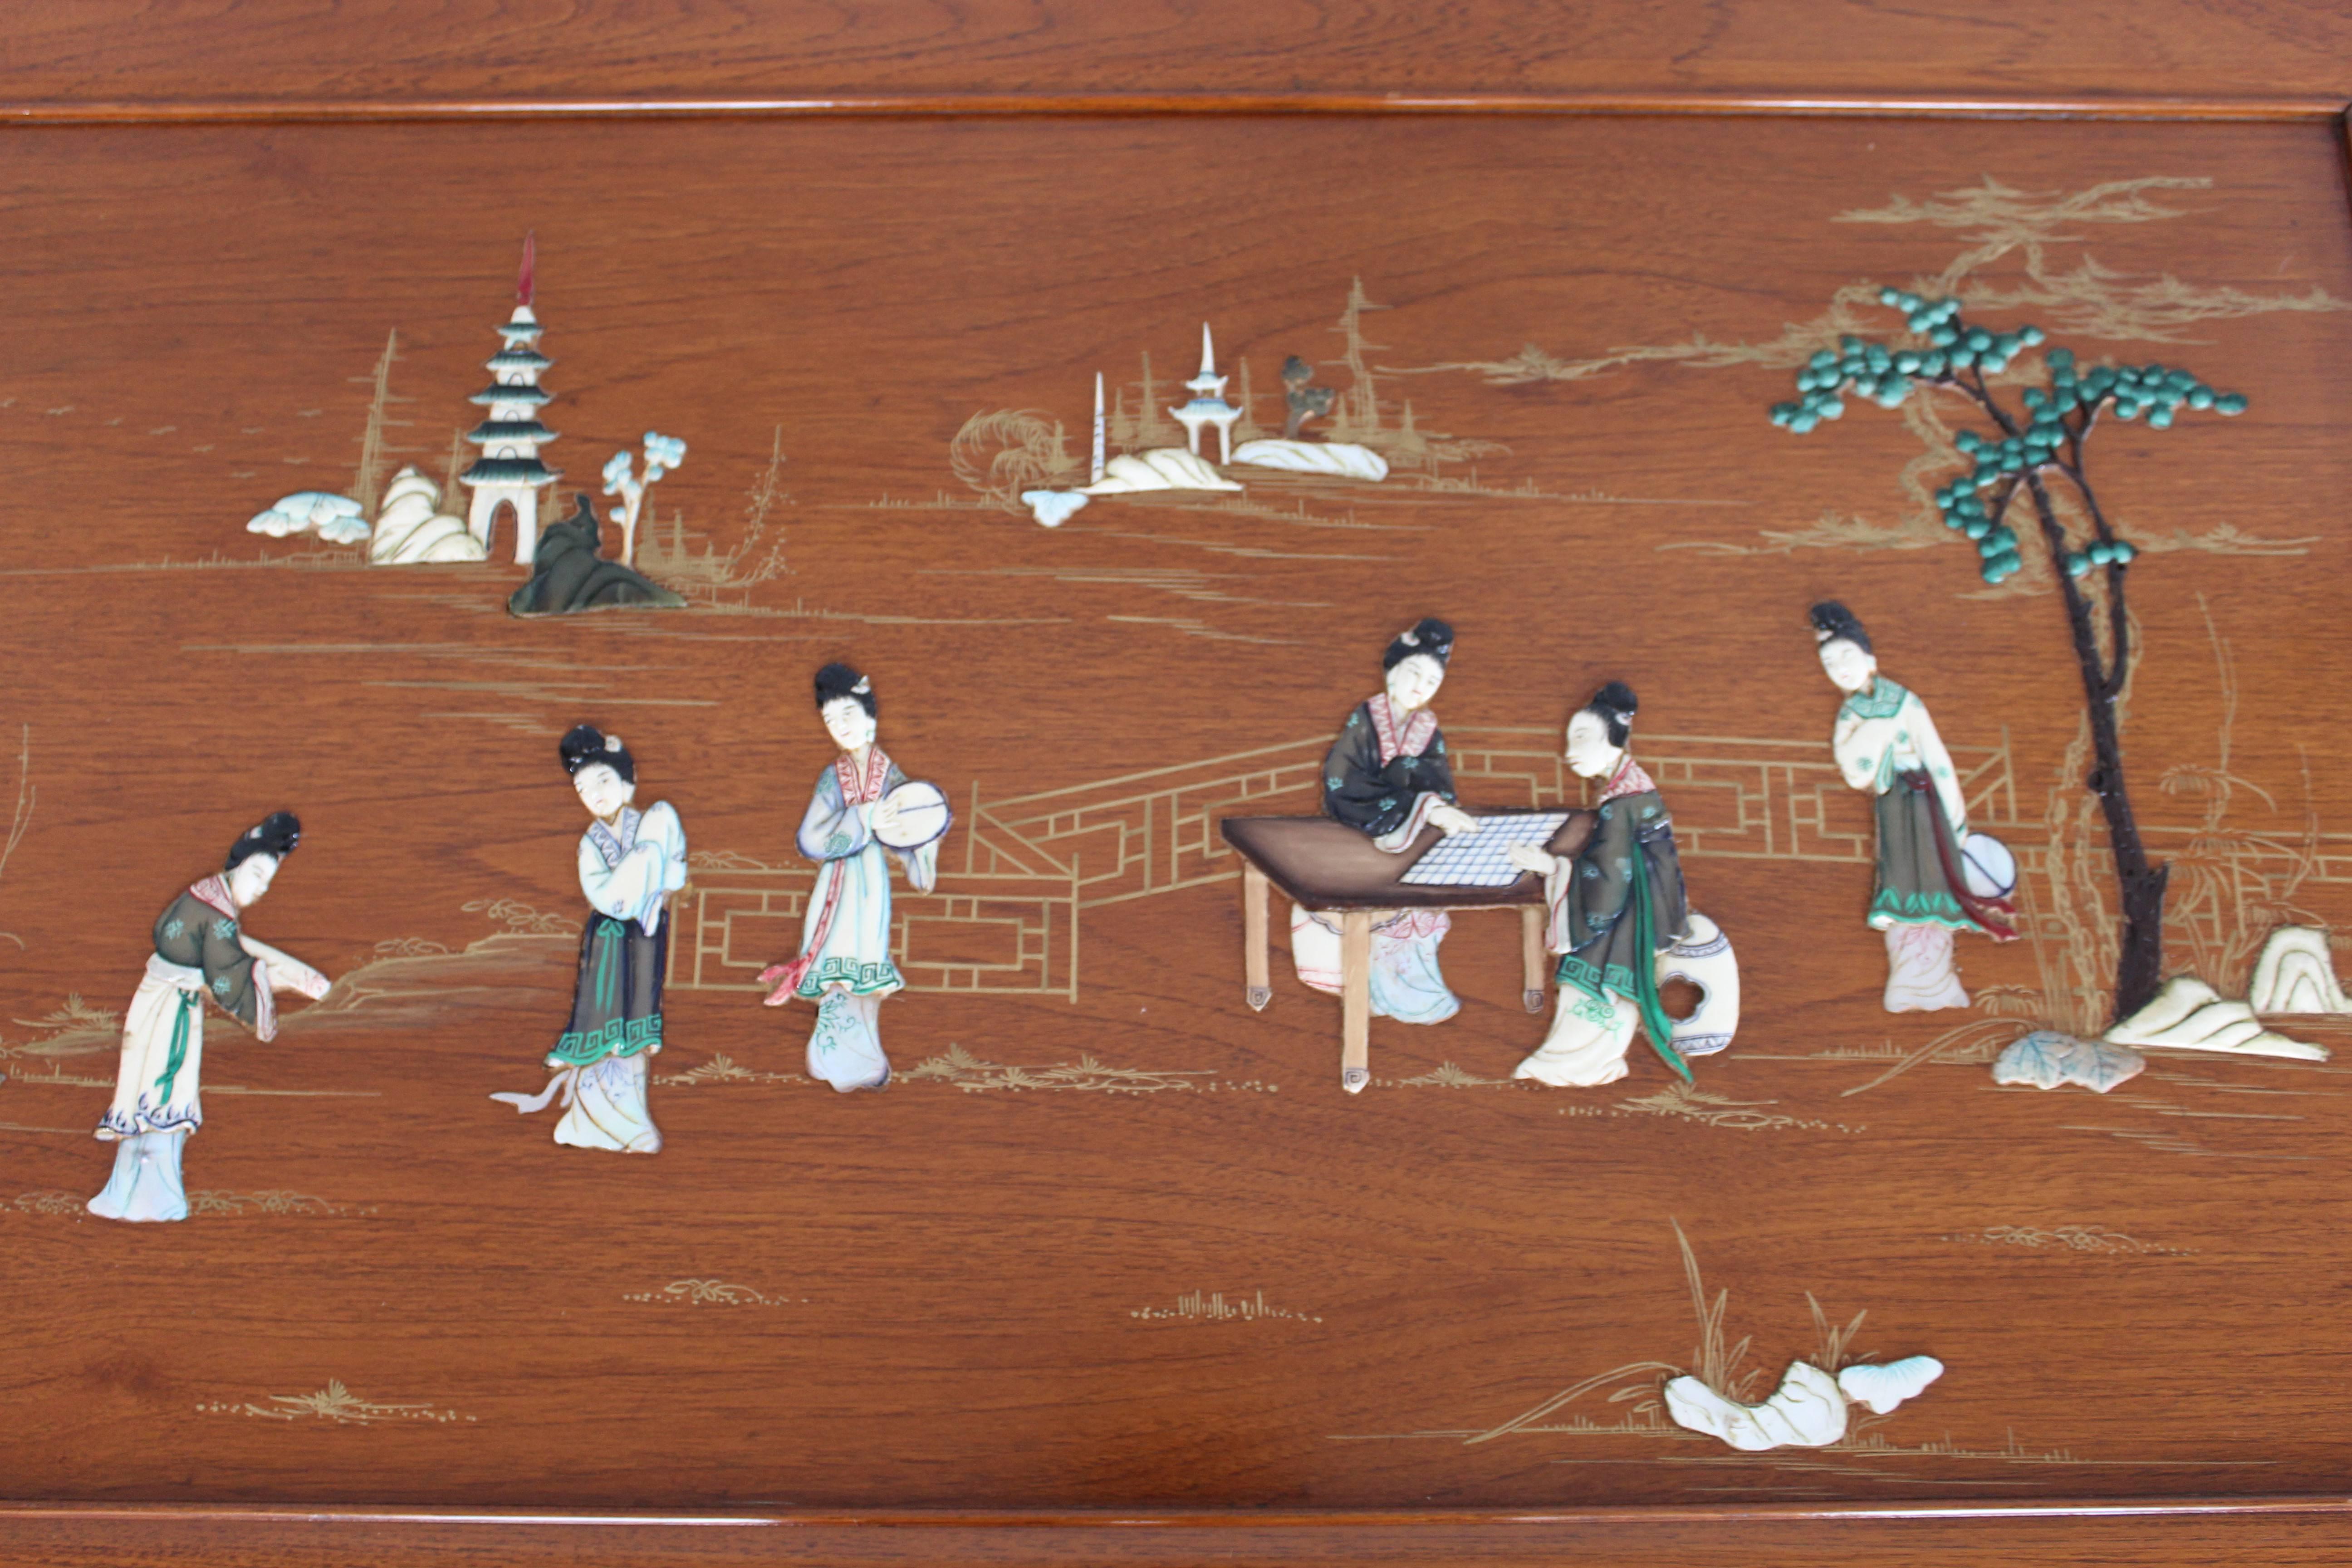 Solid rosewood carved constriction with inlays of bone, mother-of-pearl and jade (nephrite) depicting ladies dressed in robes in a landscape background. Solid wood top piece. 

Glass top not included as it has chips on corners.